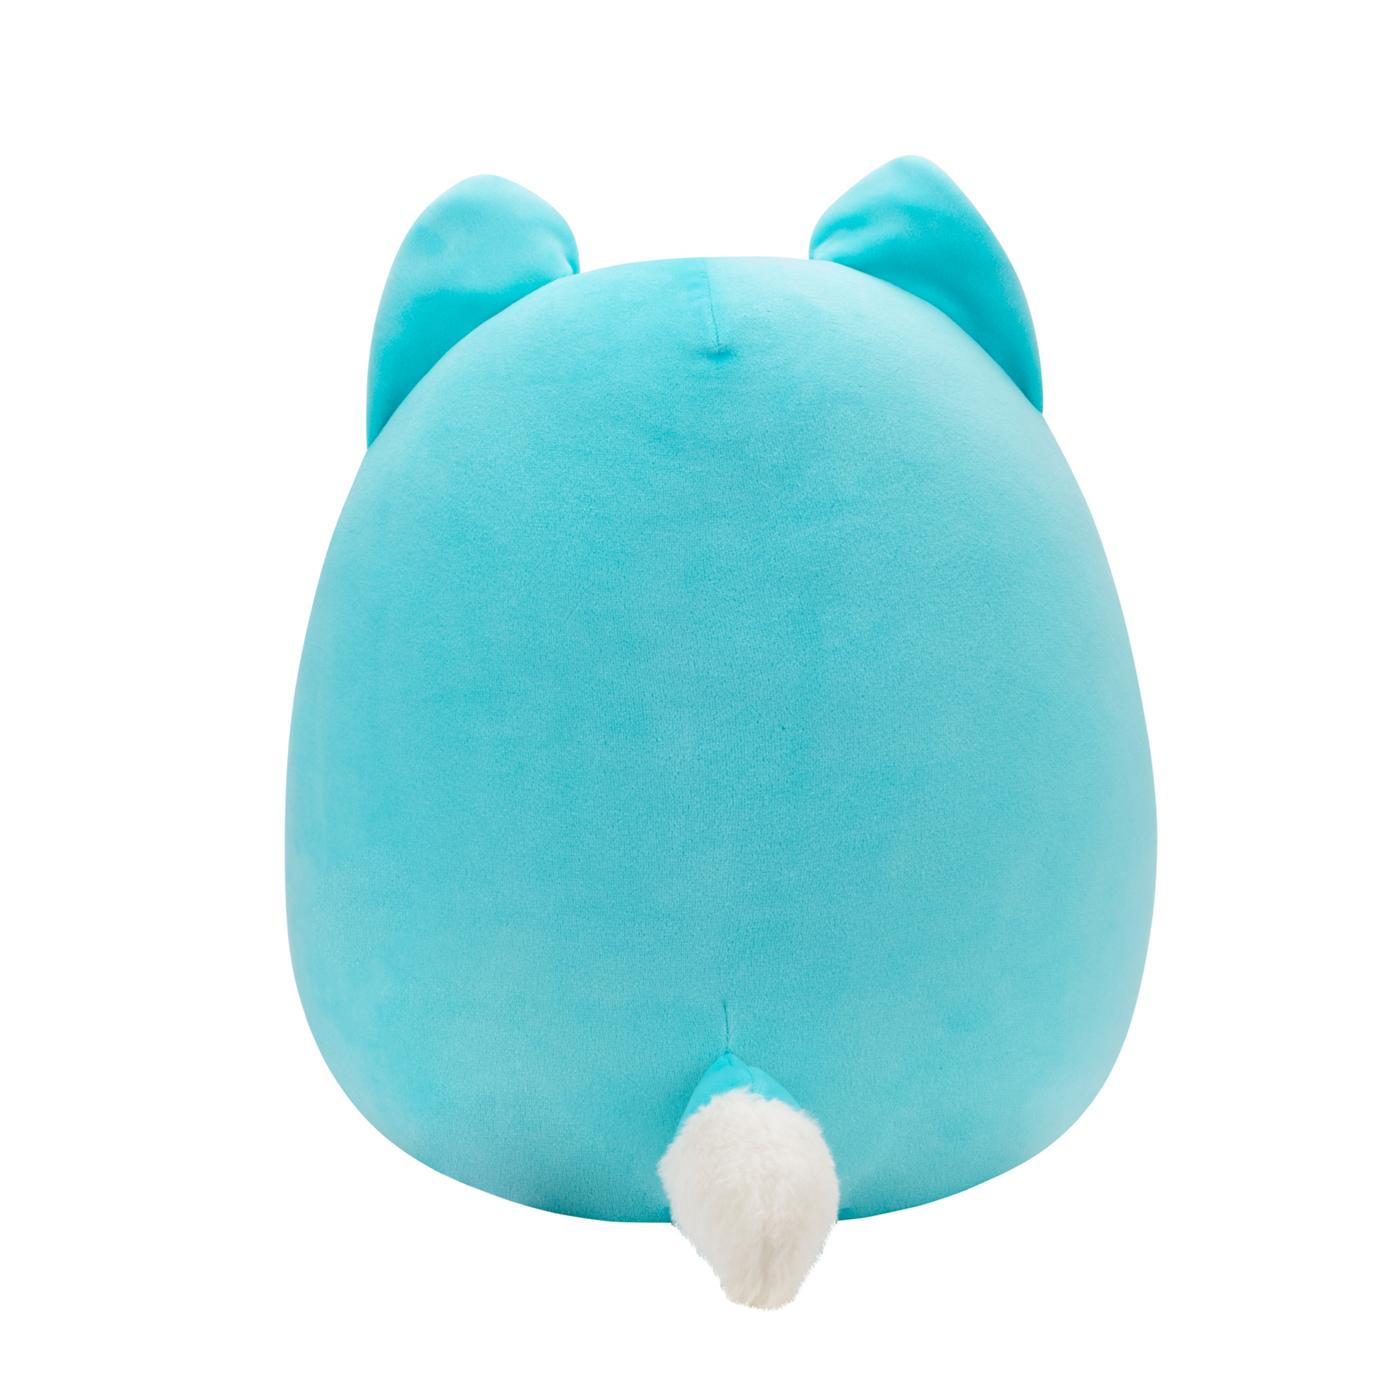 Squishmallows Pania the Teal Fox Valentine's Plush; image 2 of 3